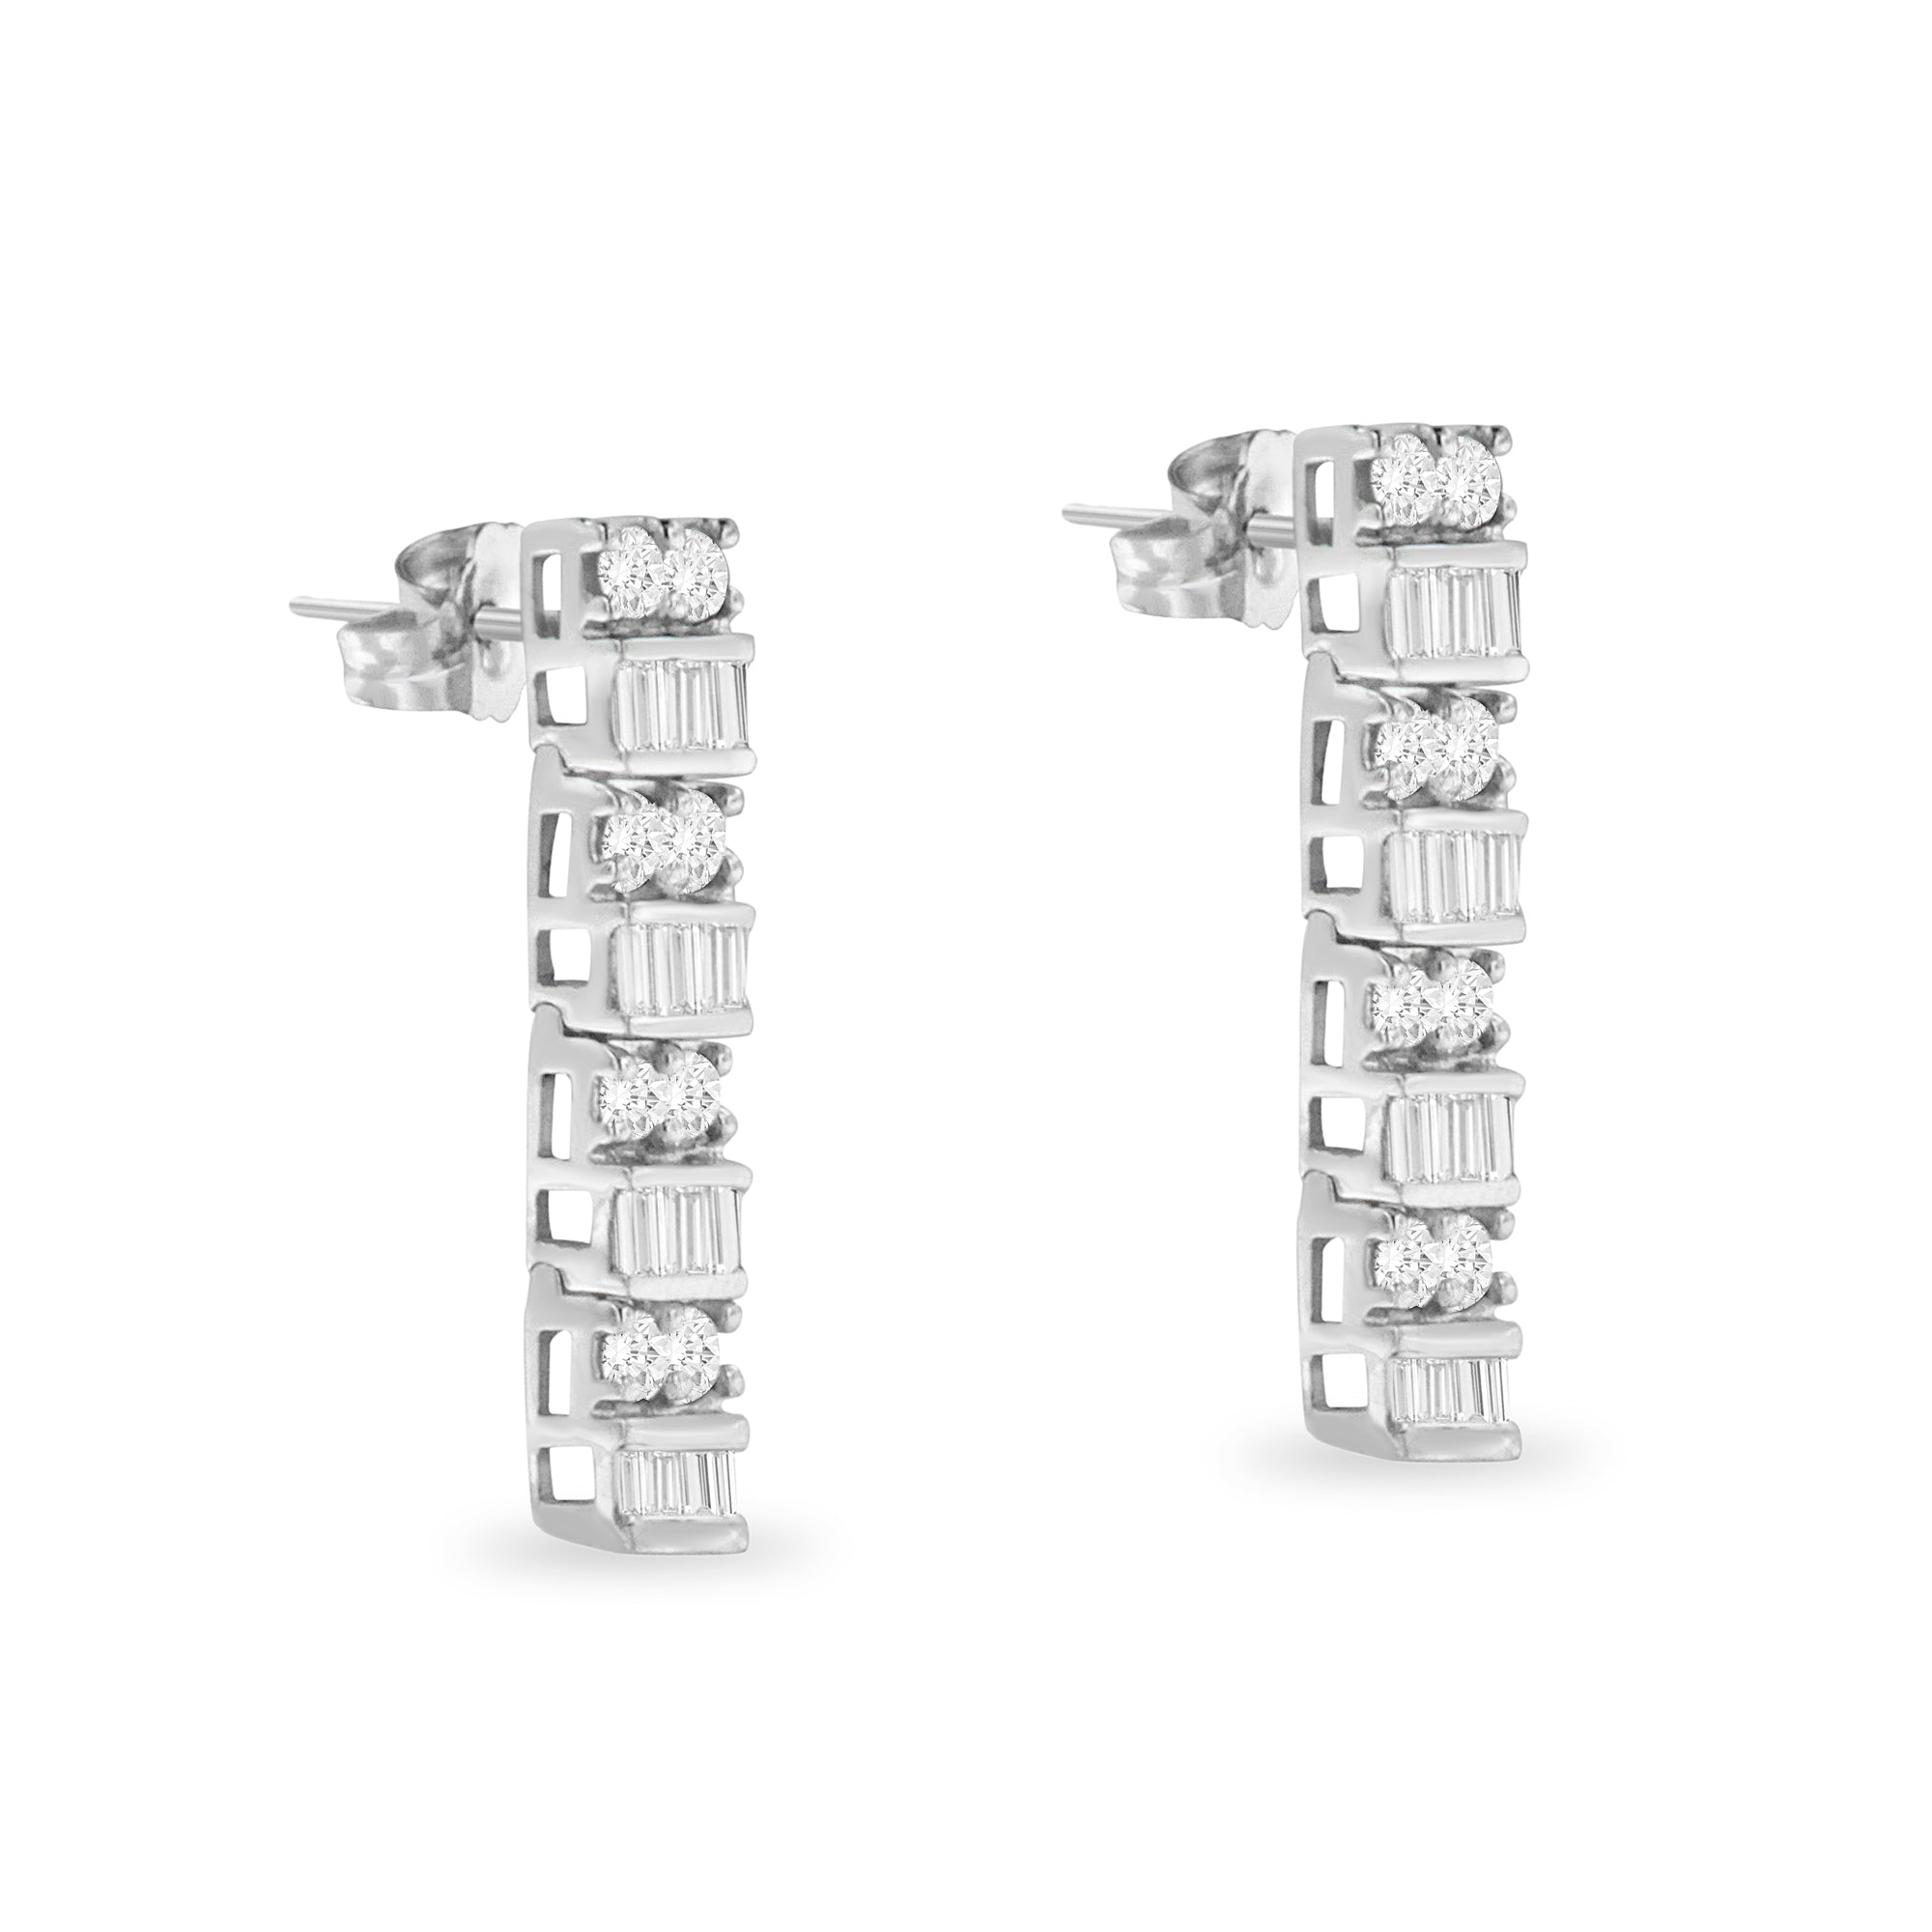 14K White Gold 1 1/3 cttw Round And Baguette Cut Diamond Earrings